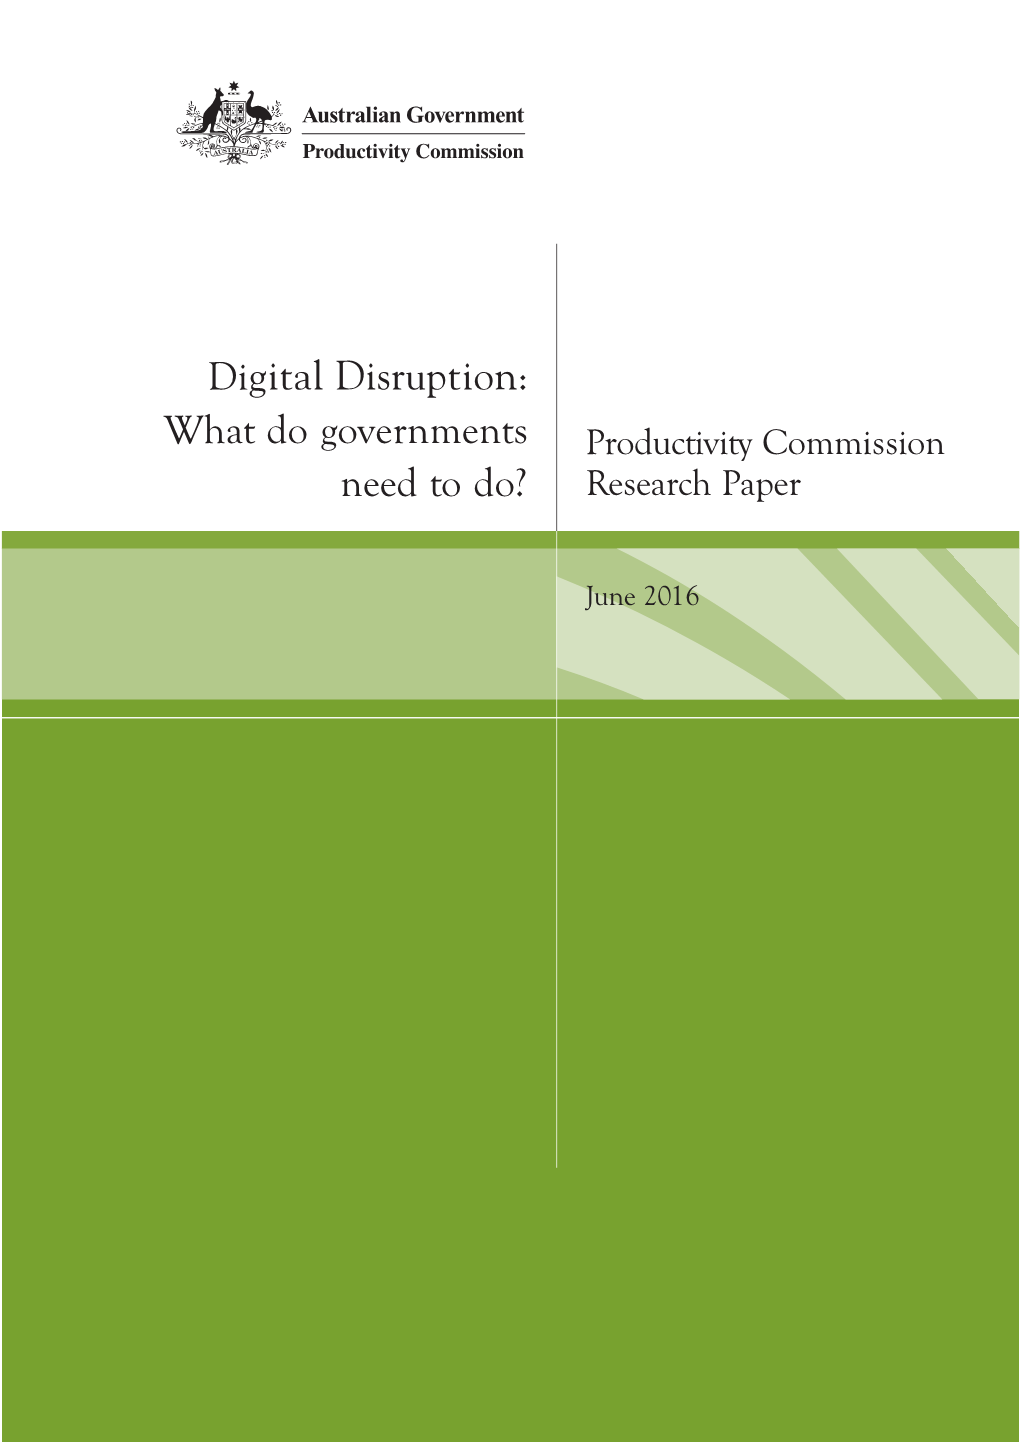 Digital Disruption: What Do Governments Productivity Commission Need to Do? Research Paper